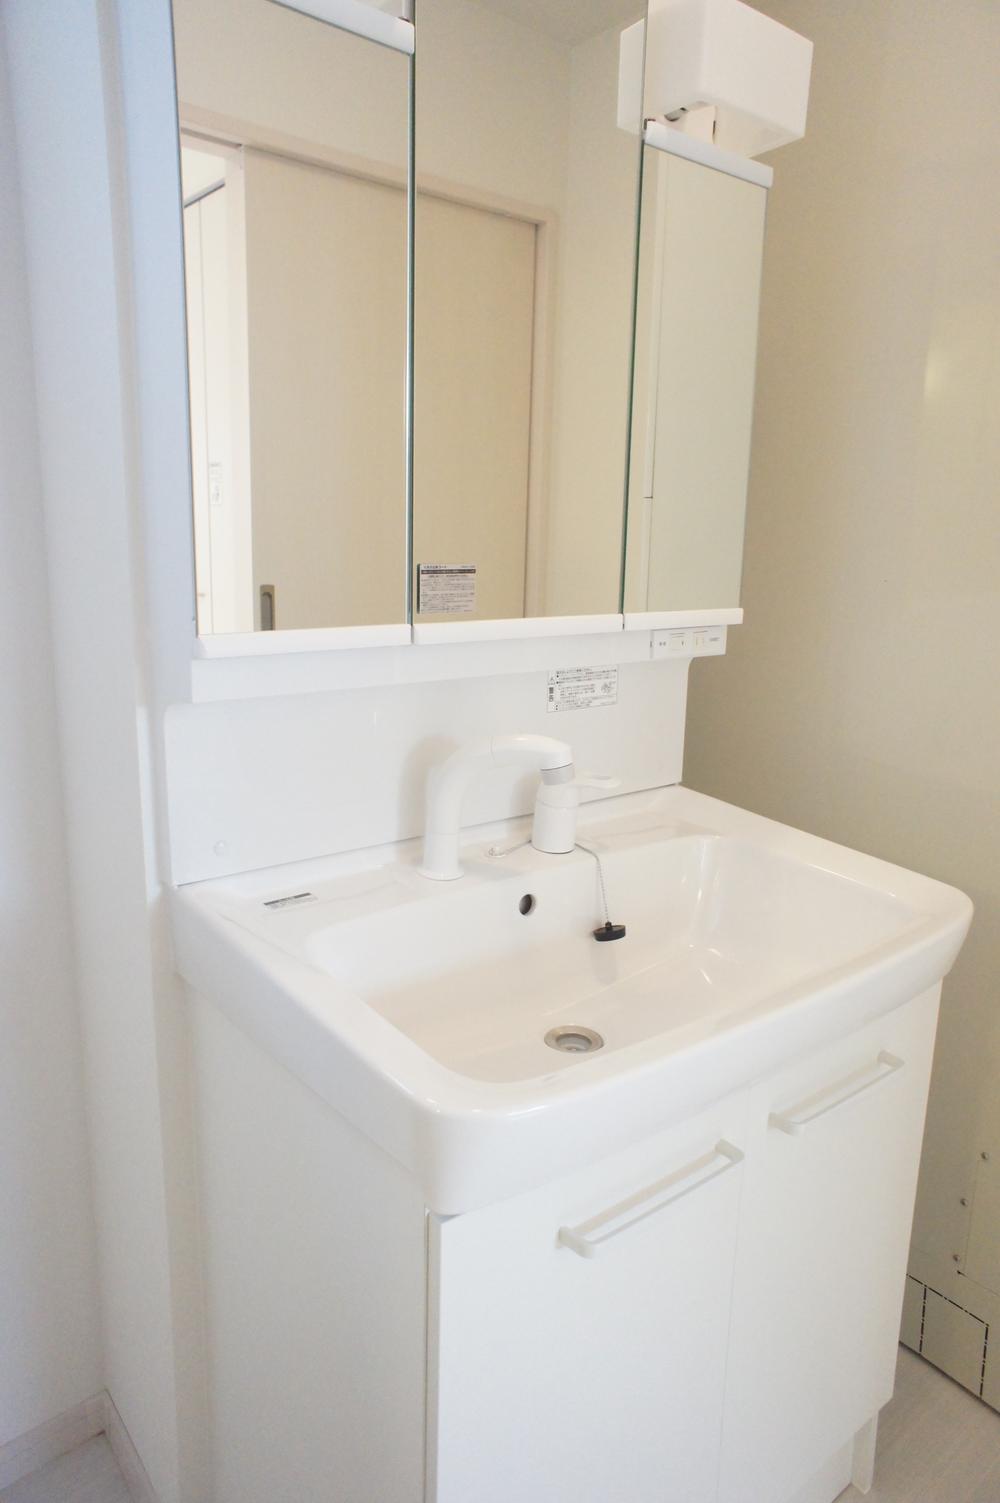 Wash basin, toilet. Washstand that white was the keynote of flawless